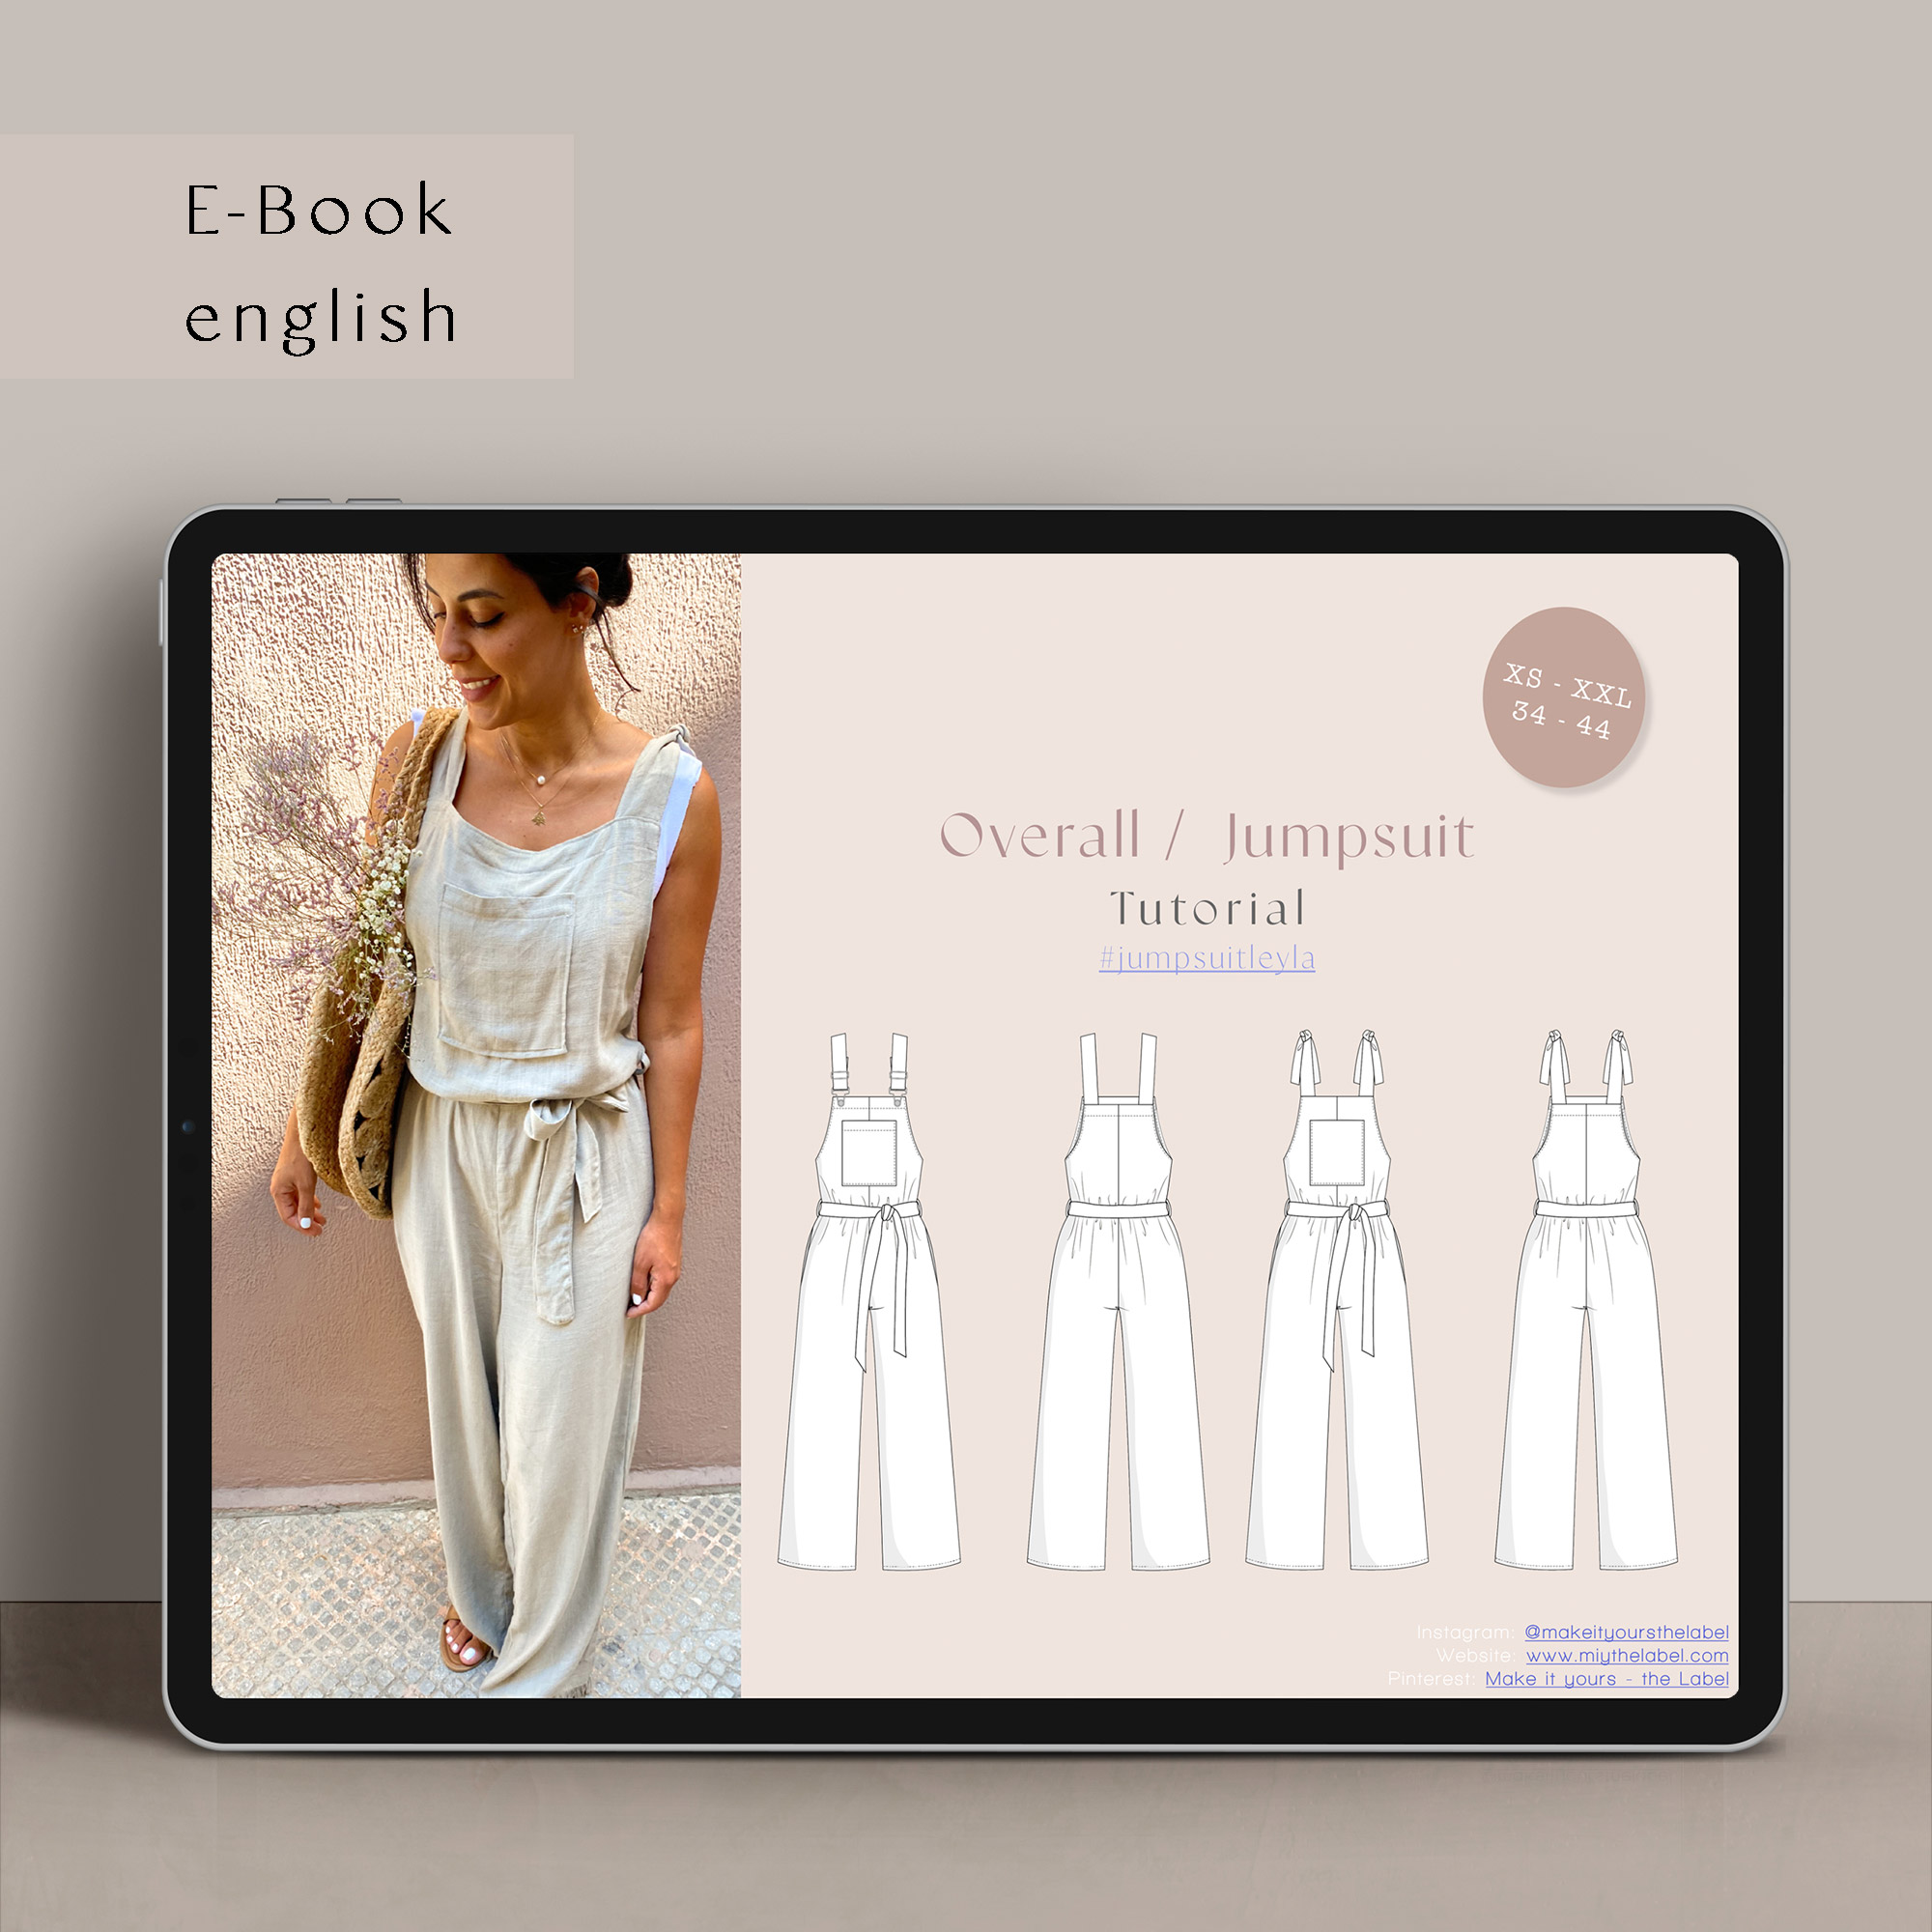 https://makeityoursthelabel.com/wp-content/uploads/2020/09/Long-Jumpsuit-sewing-pattern-for-women-in-english.jpg